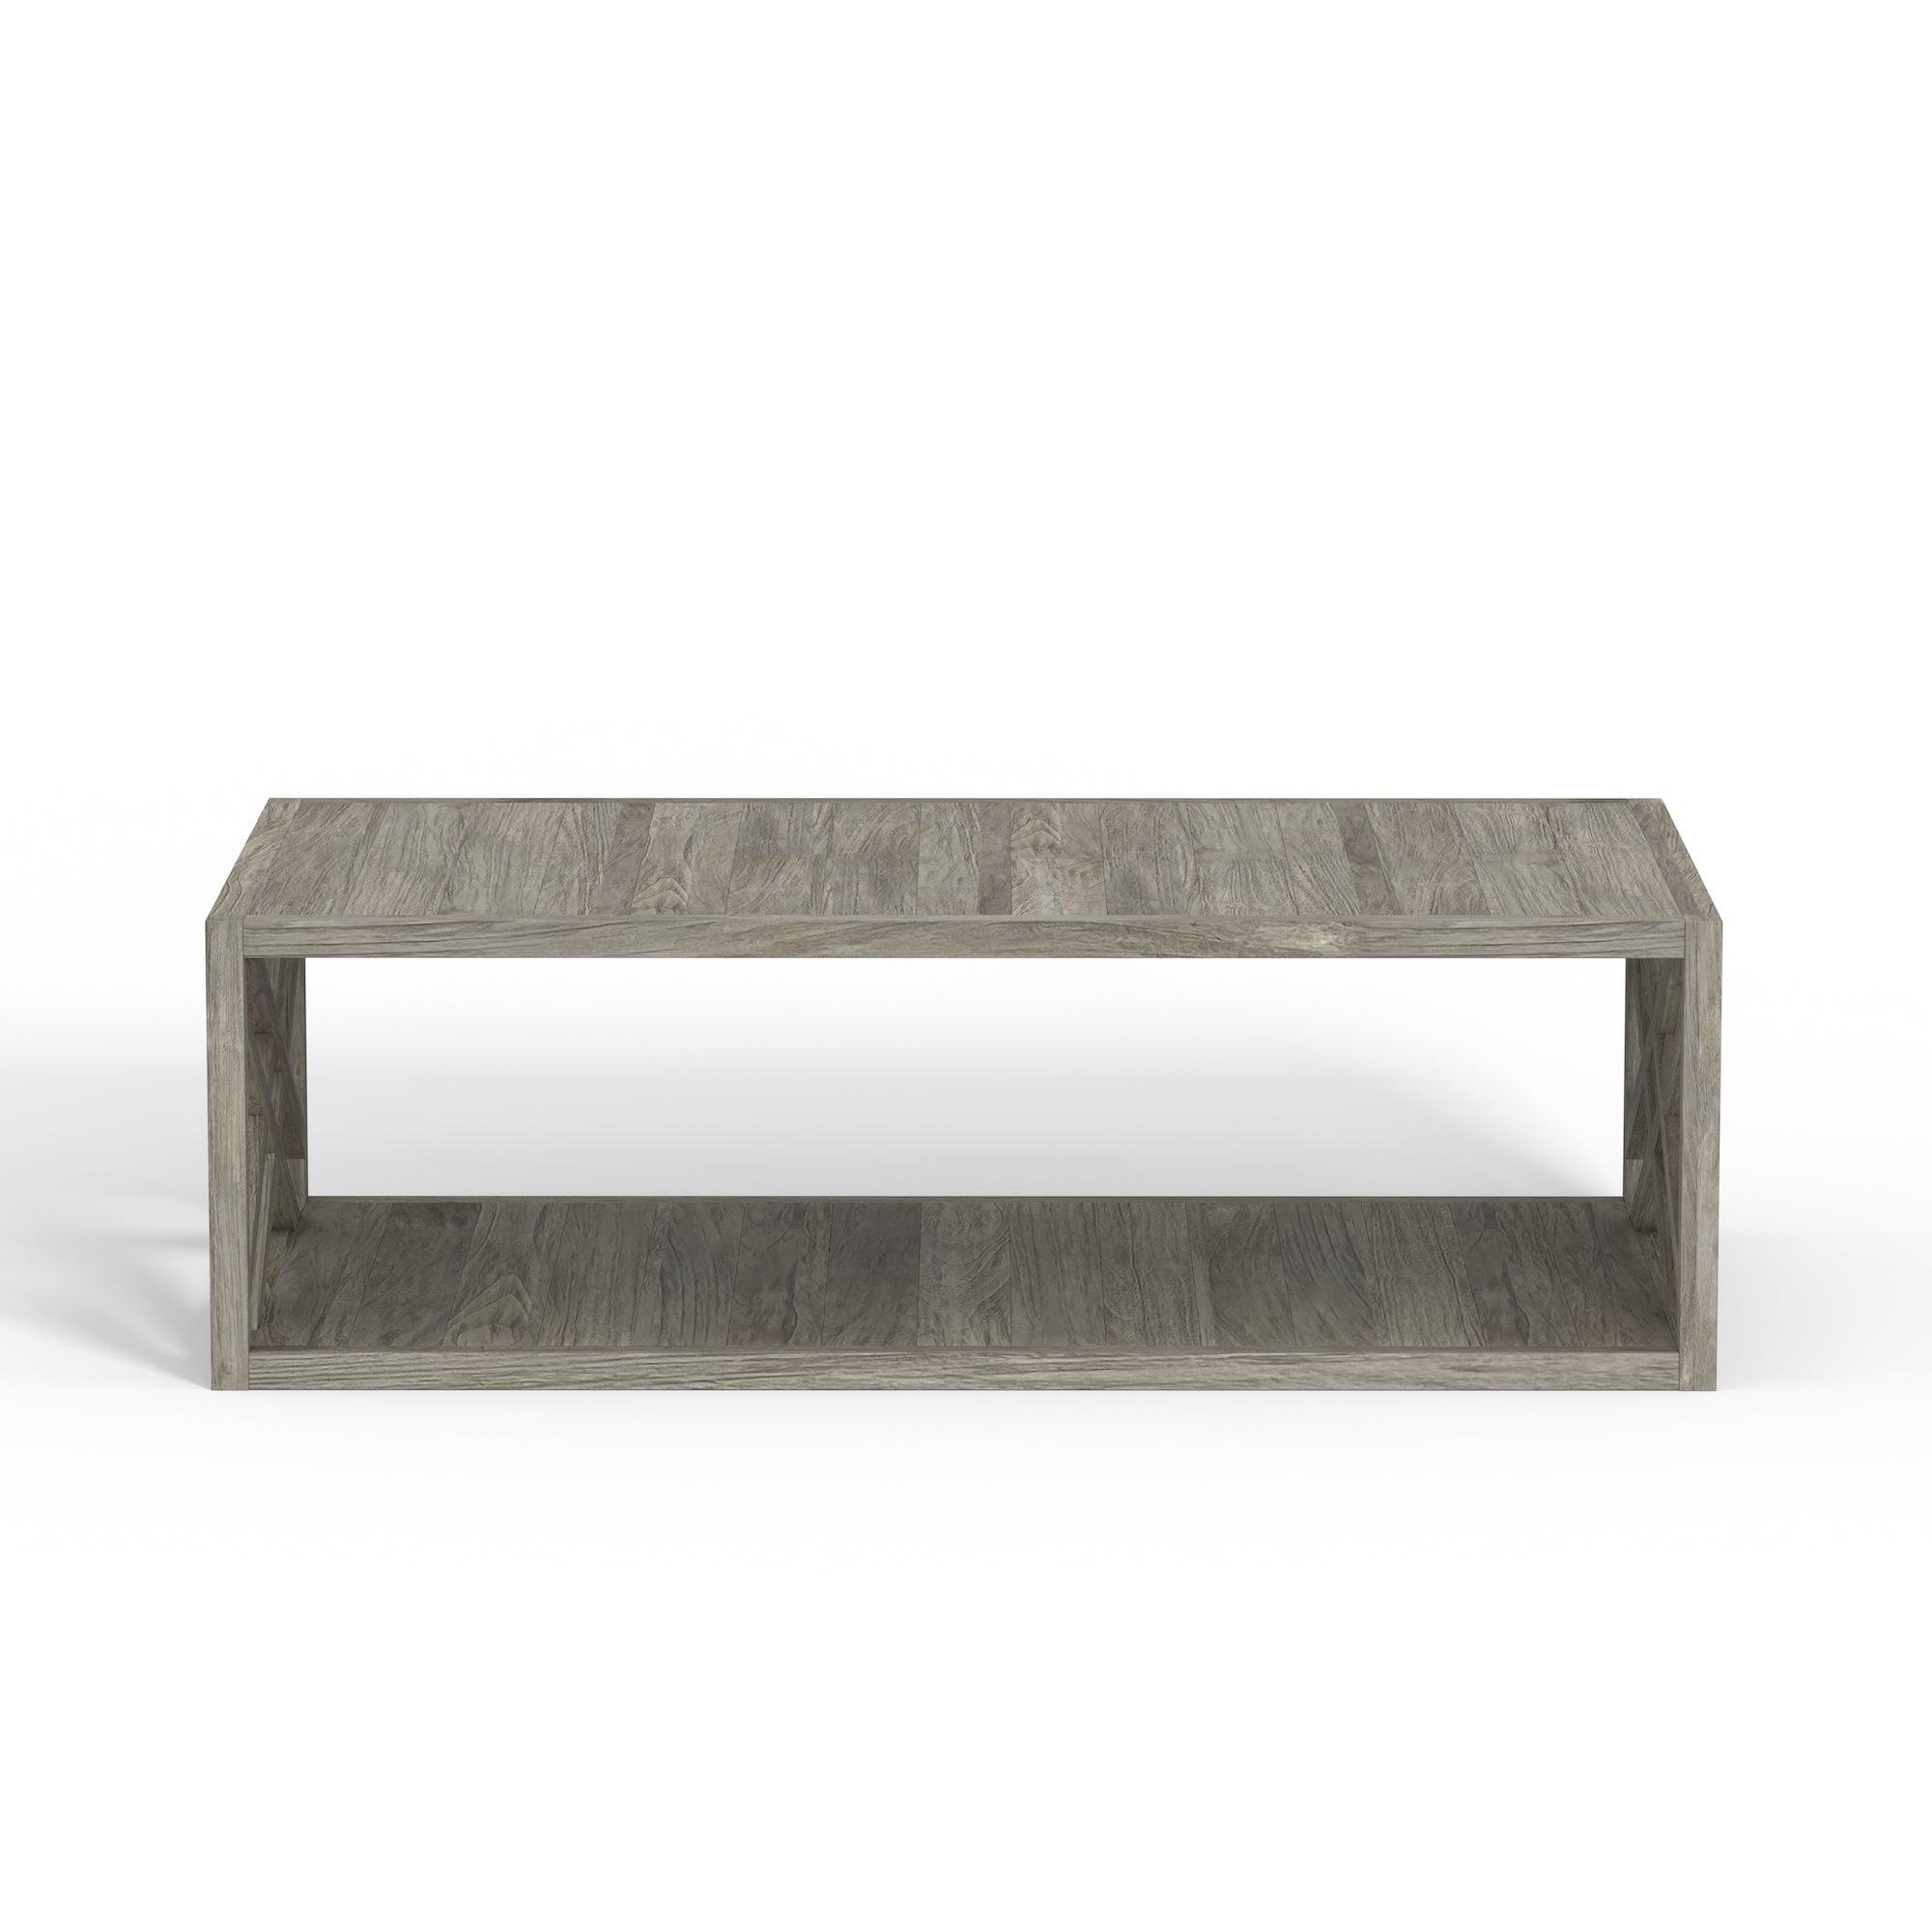 Highest Quality Weathered Gray Outdoor Coffee Table With Bespoke Design, Handcrafted By Artisans 